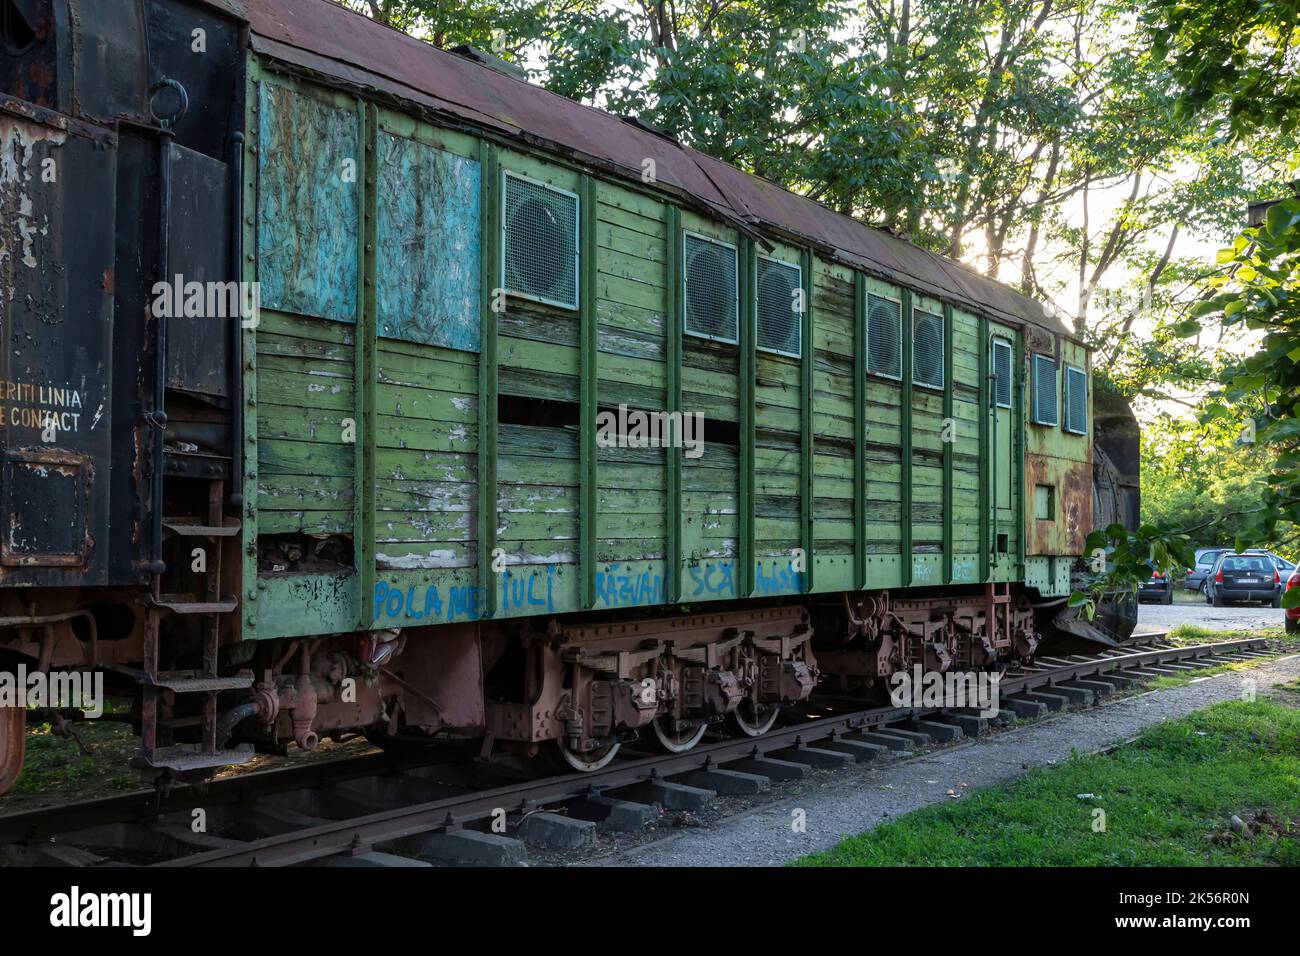 Old freight car parked in a depot in Craiova, Romania Stock Photo